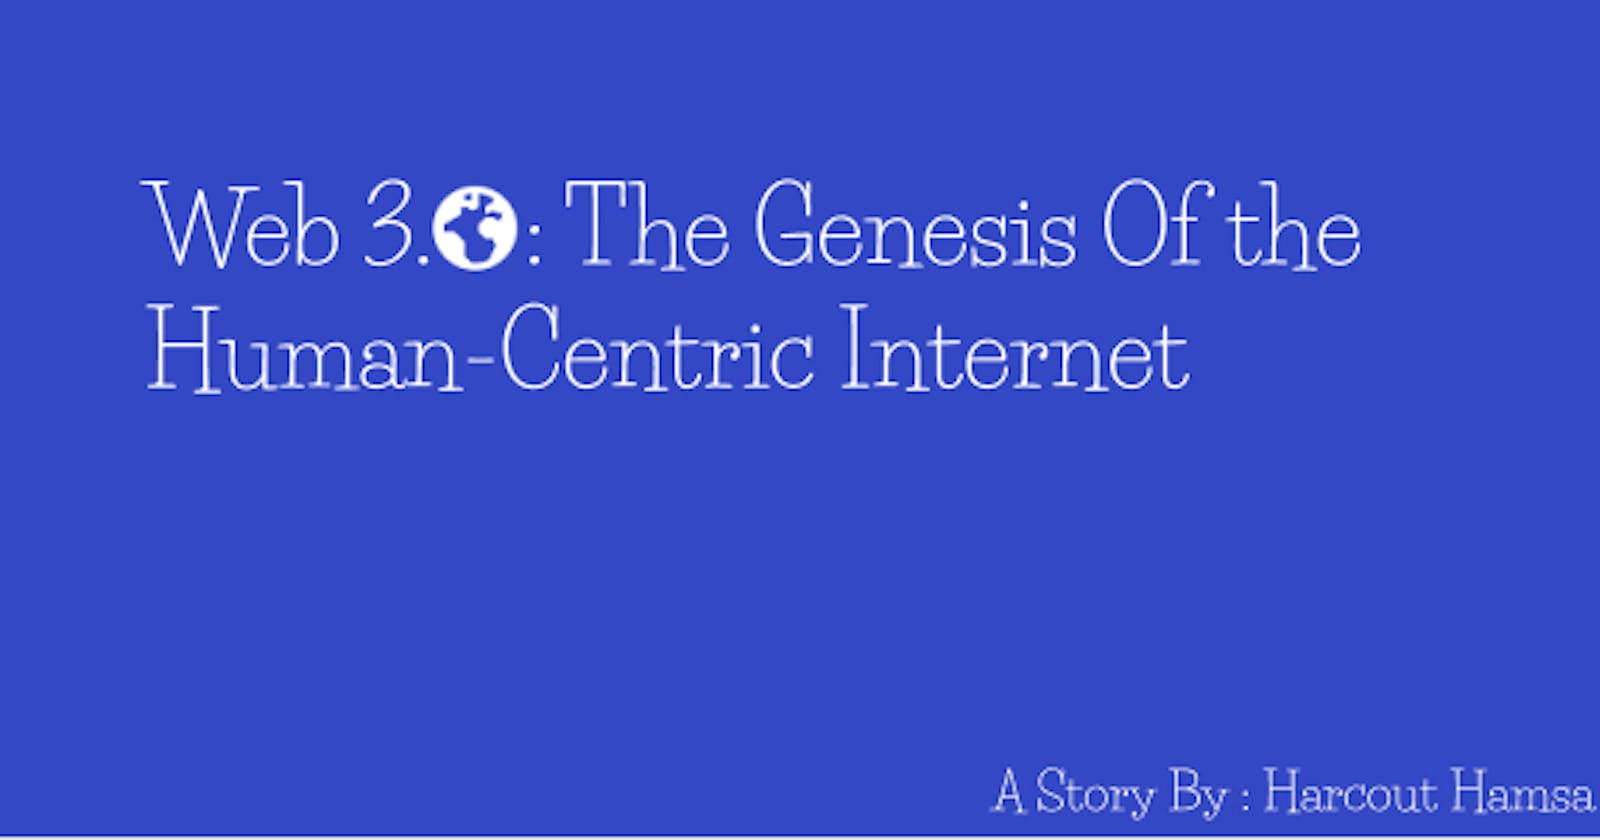 Web 3.0: The Genesis of the Human-Centric Internet